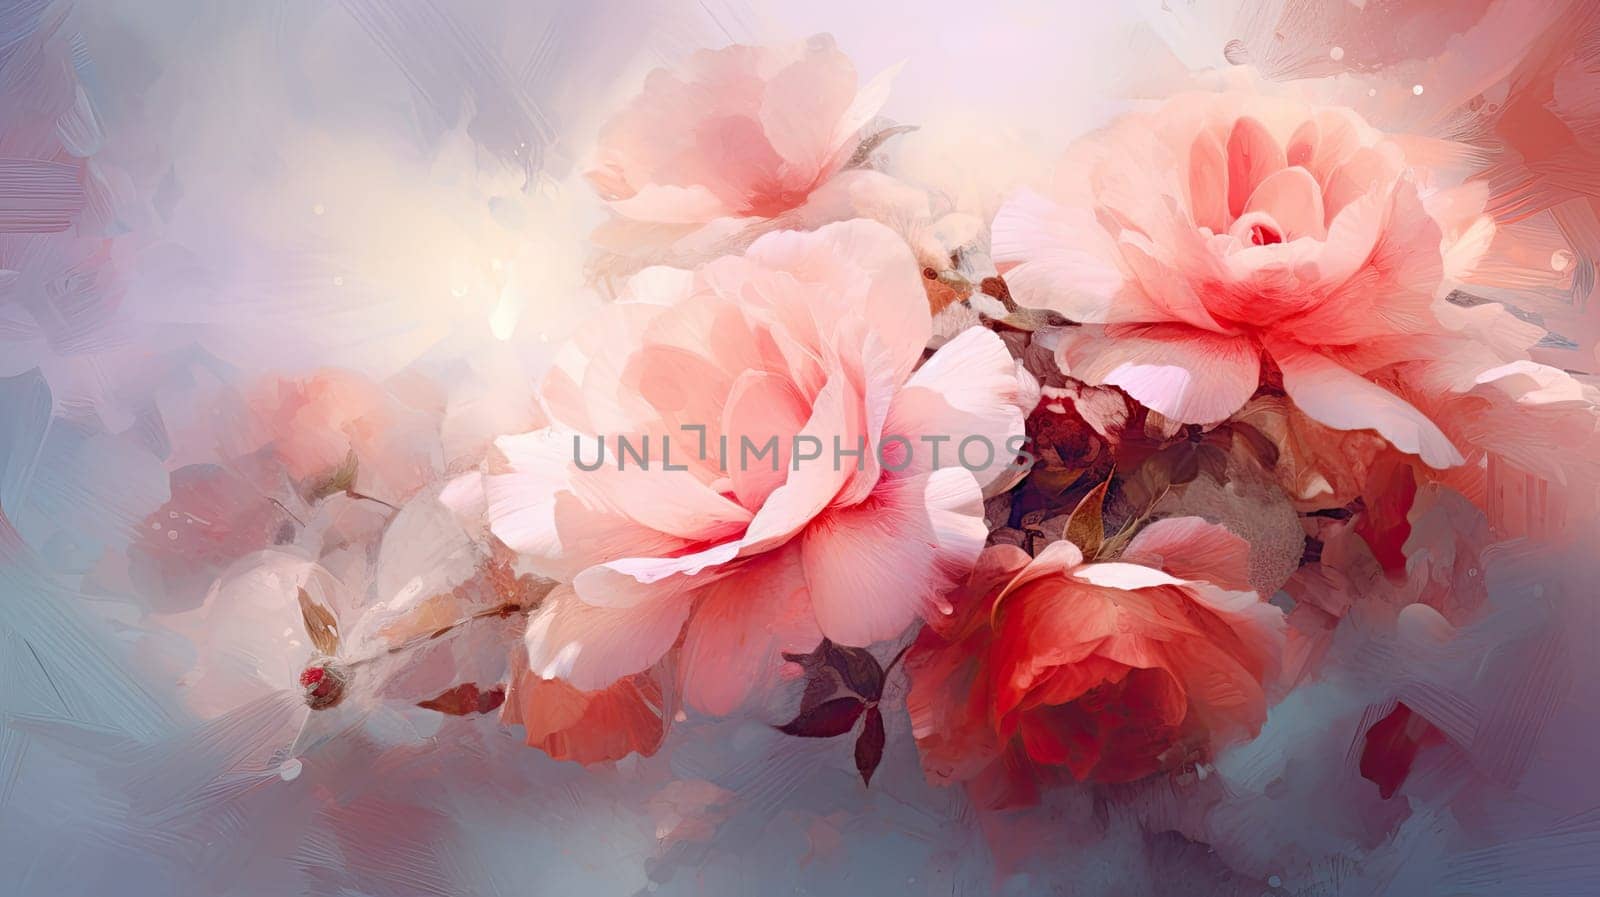 Roses in various shades photo realistic illustration - Generative AI. Colorful, roses, flower, bud.